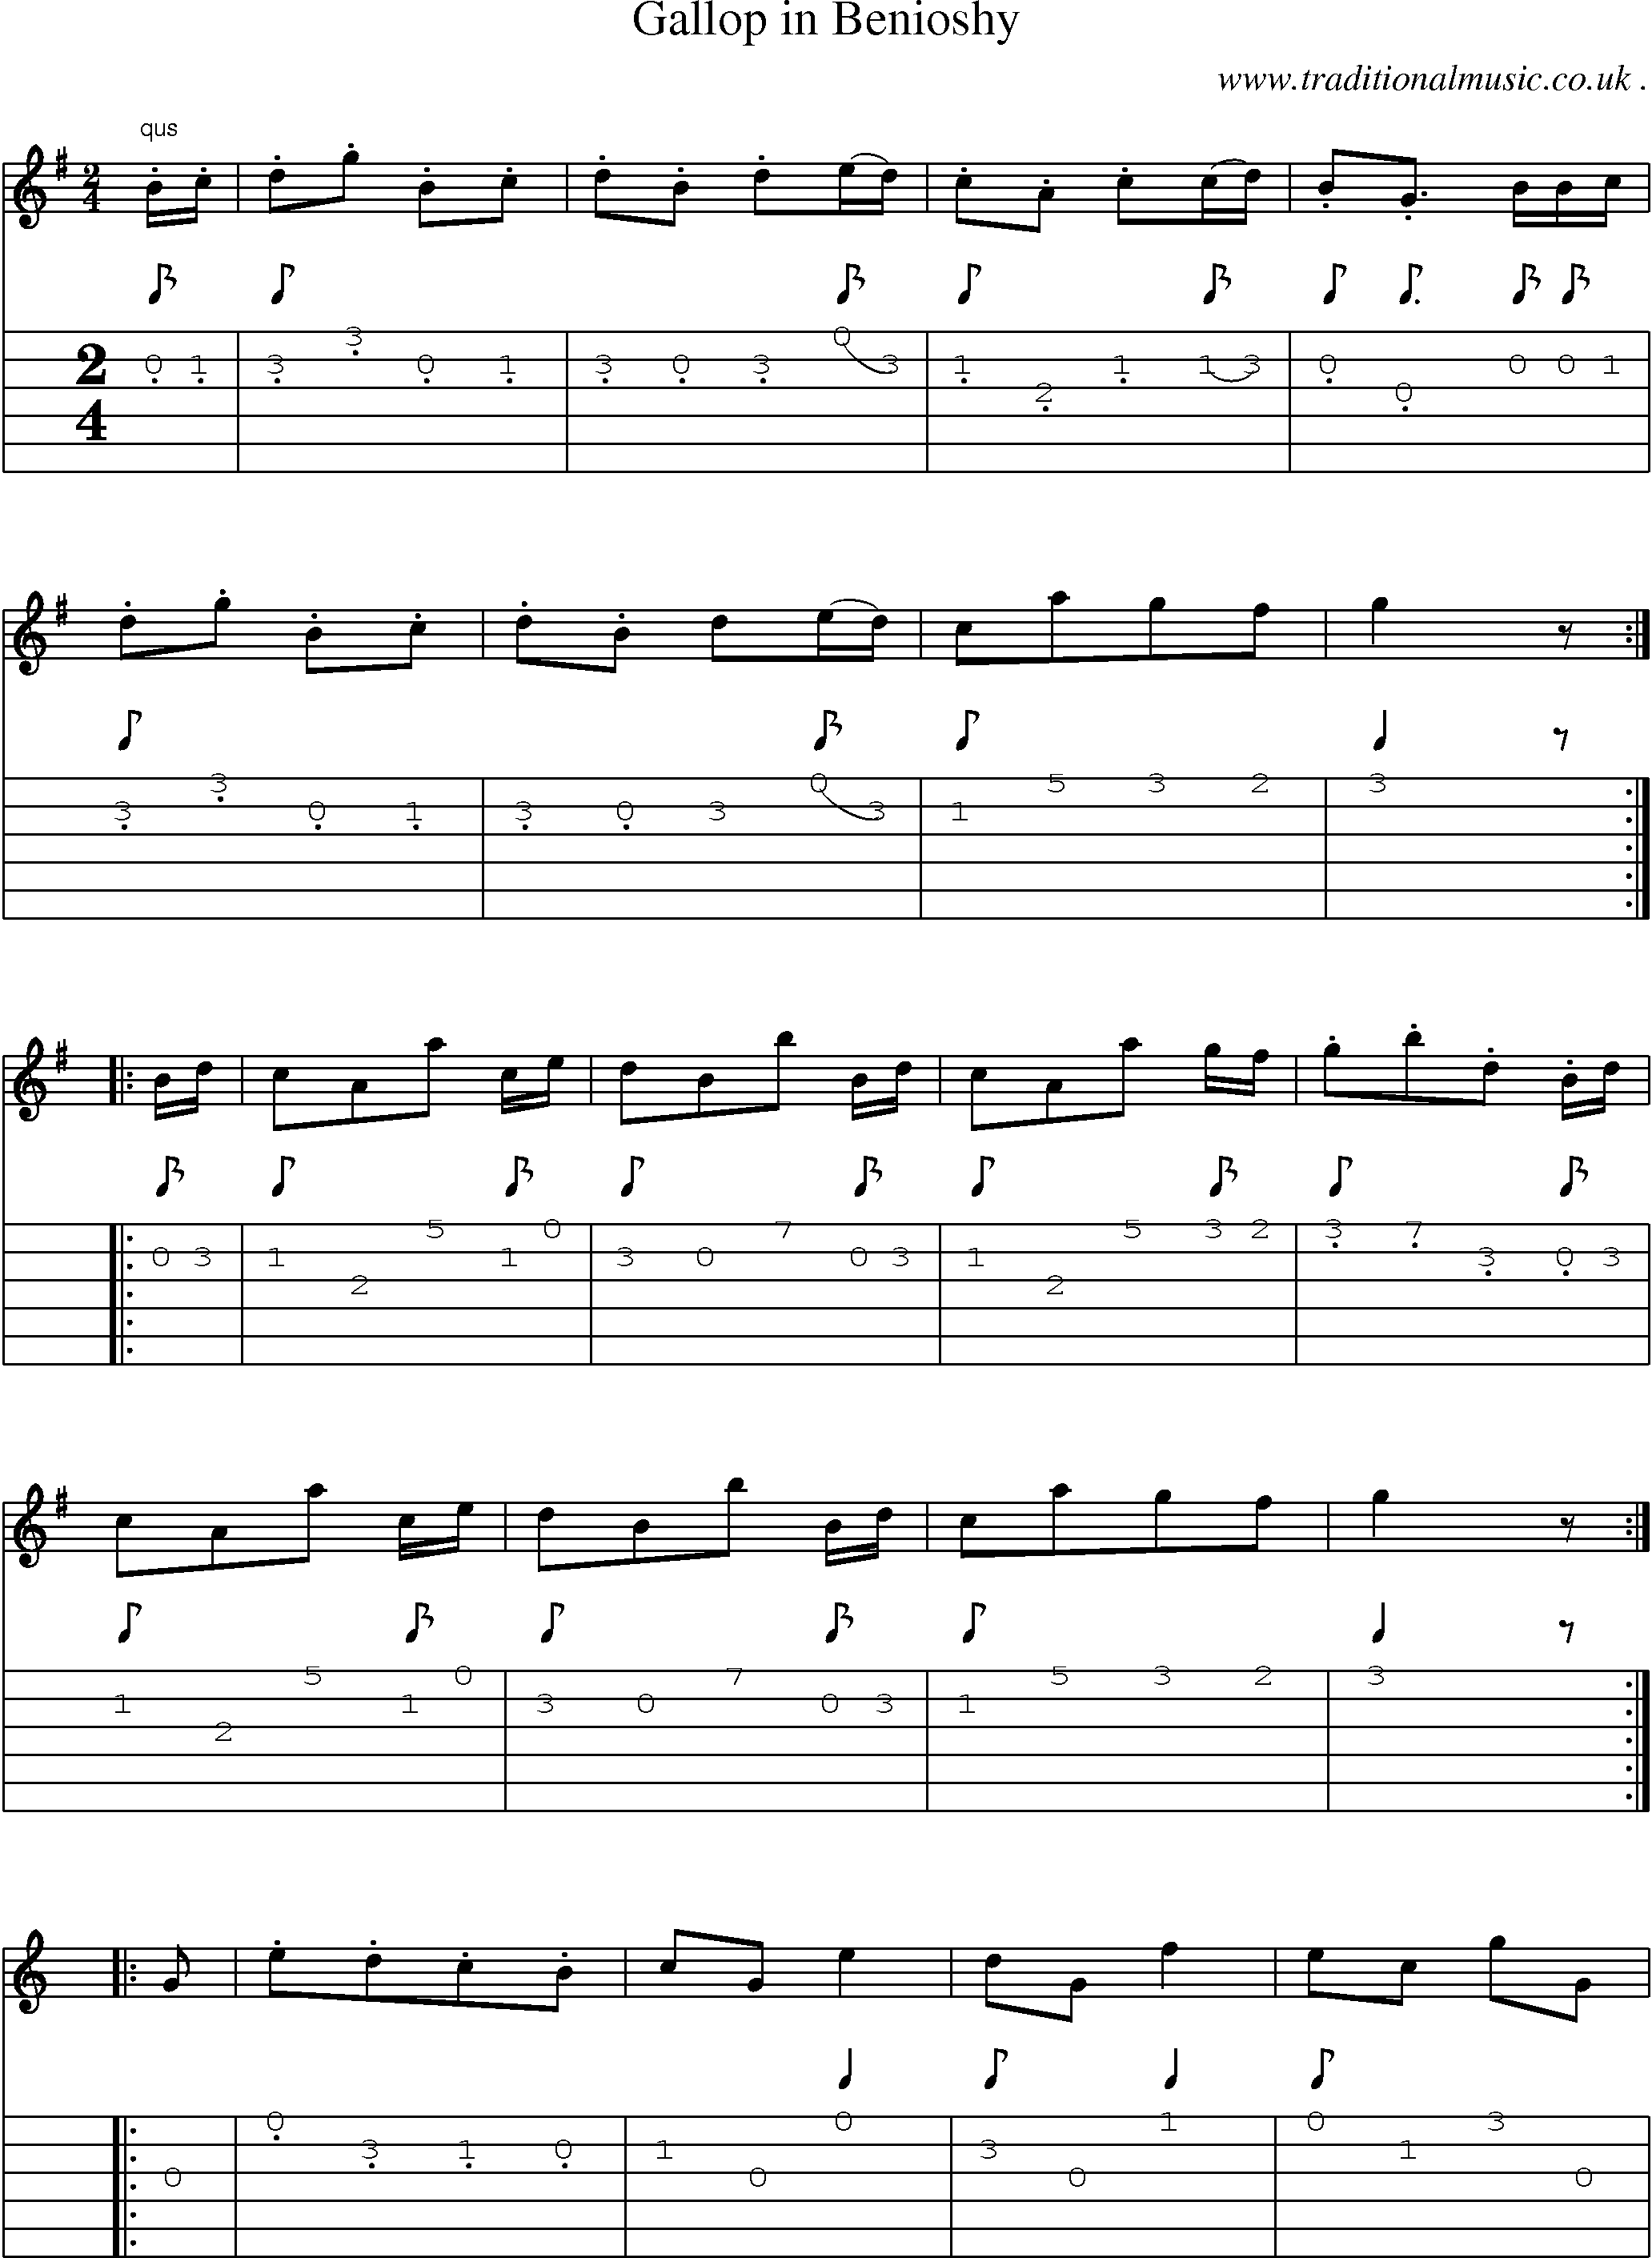 Sheet-Music and Guitar Tabs for Gallop In Benioshy